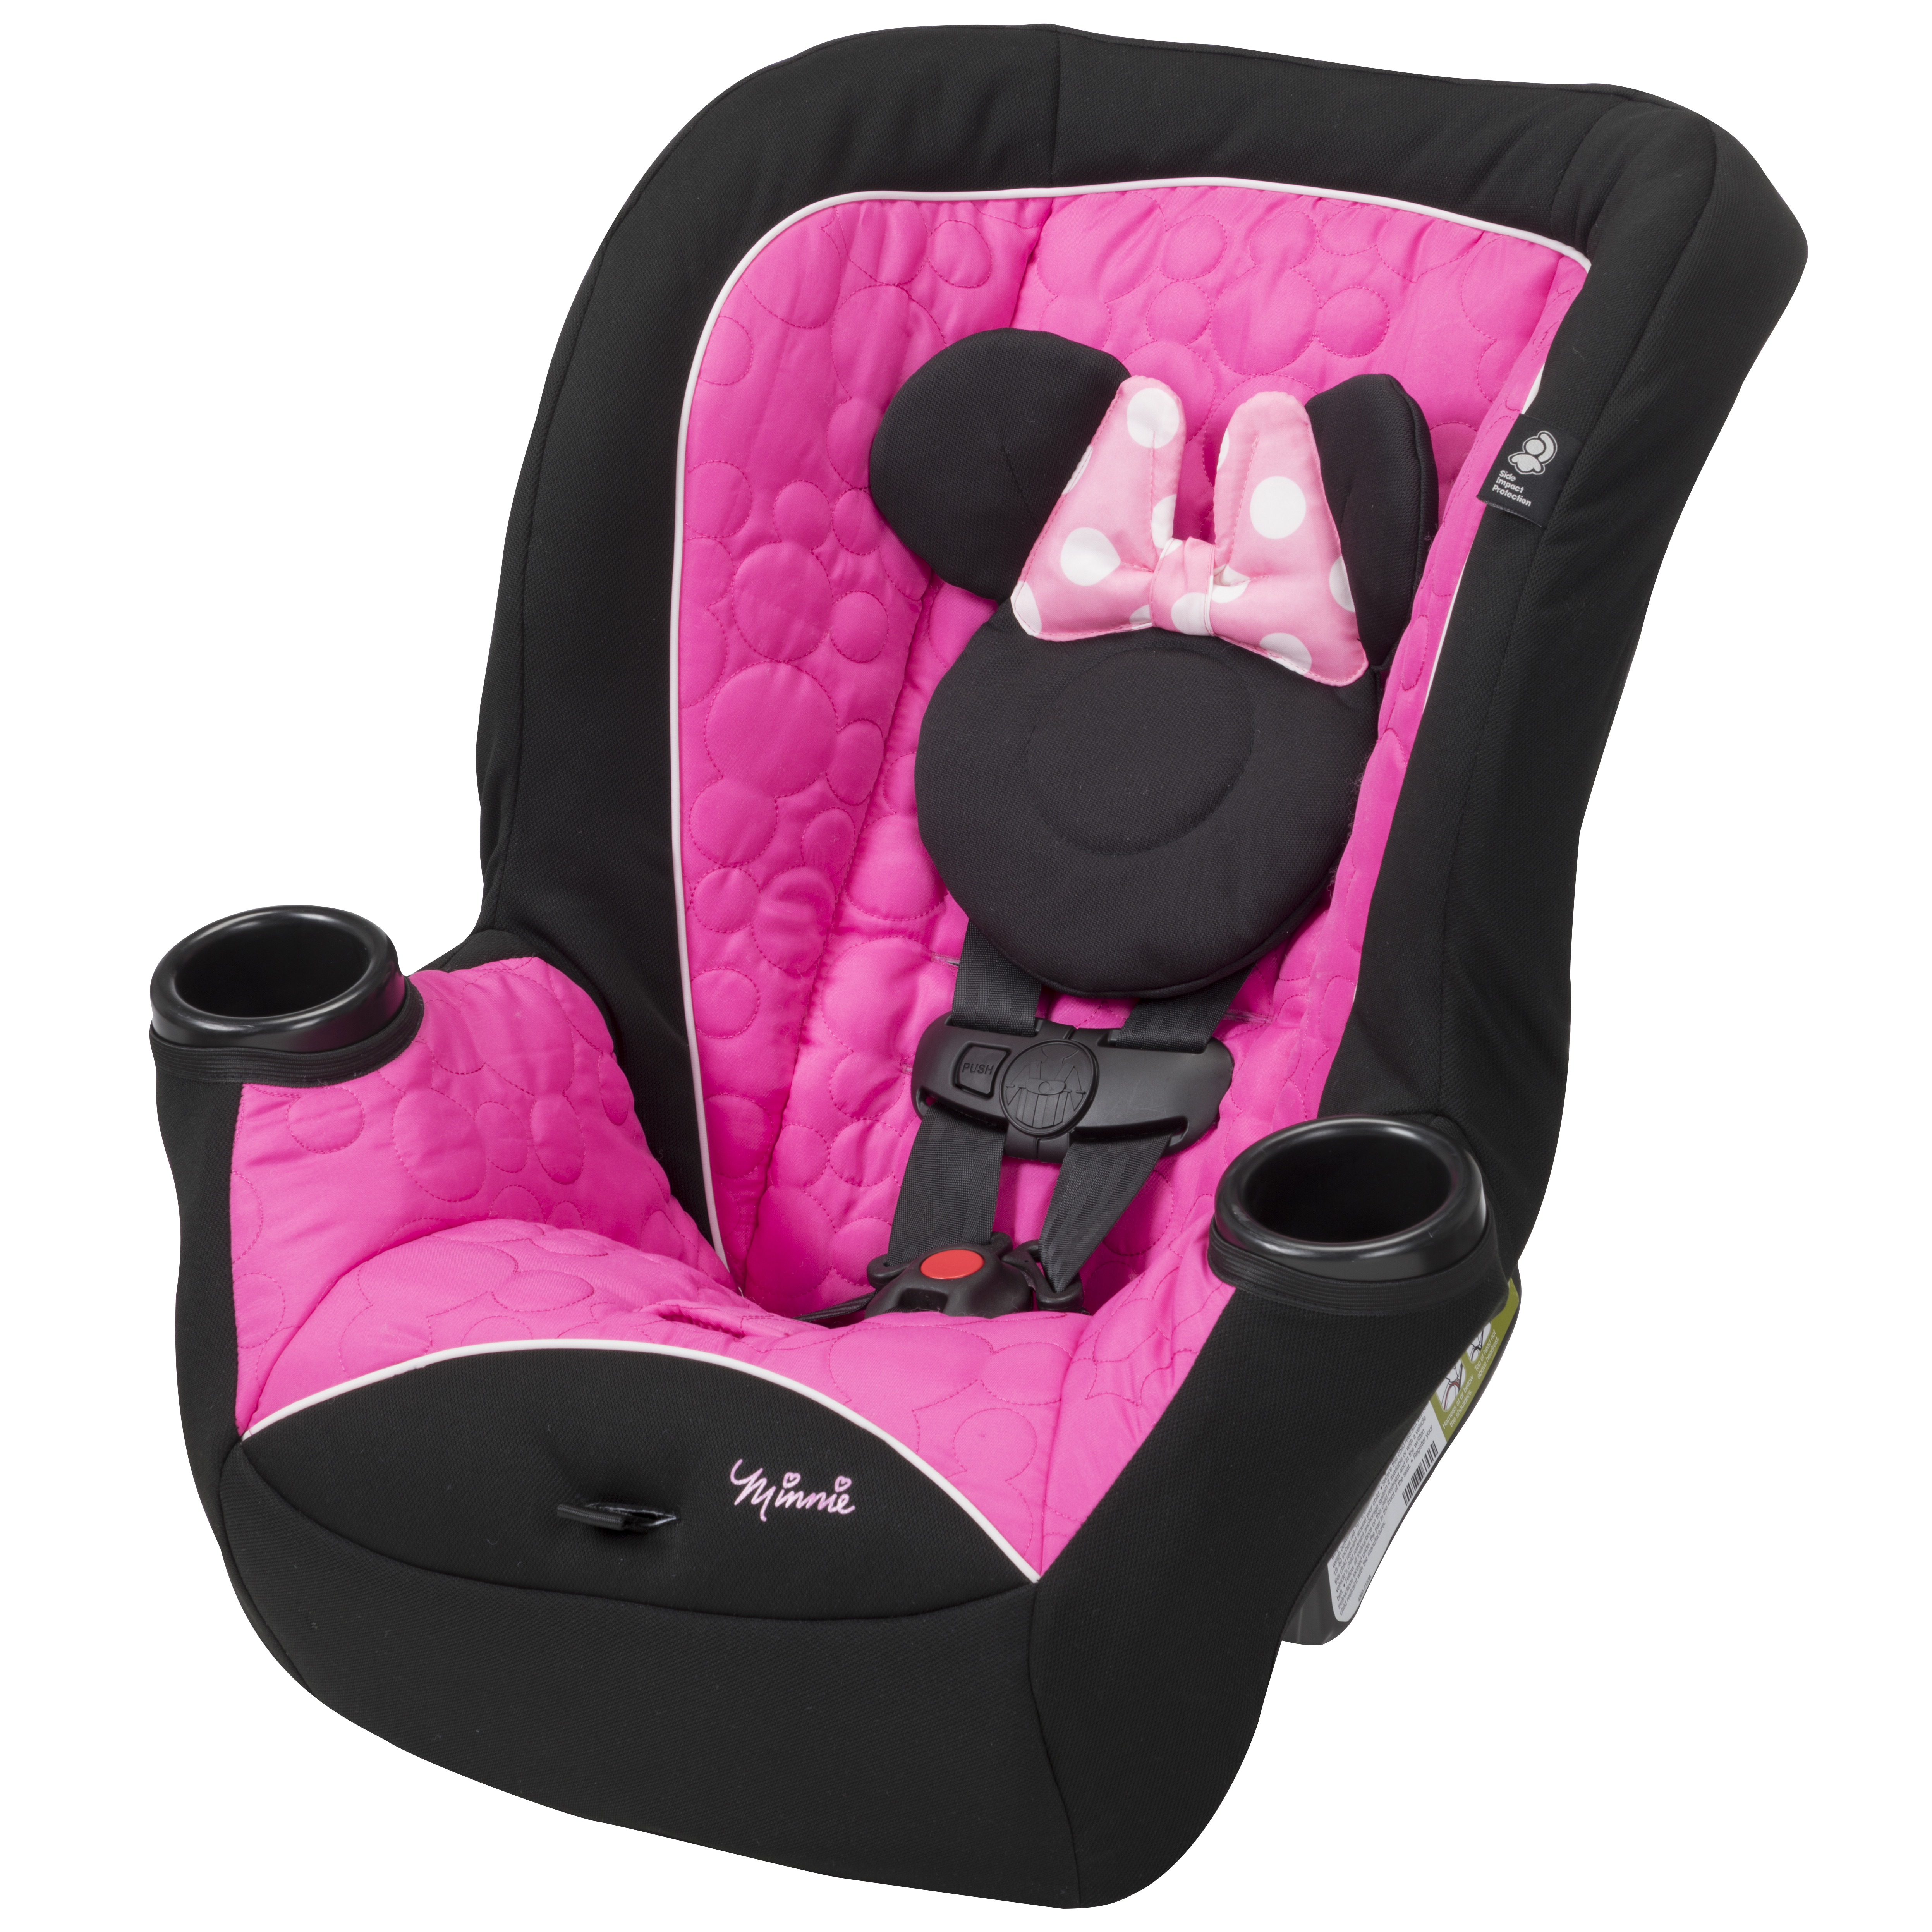 kmart strollers and car seats on sale